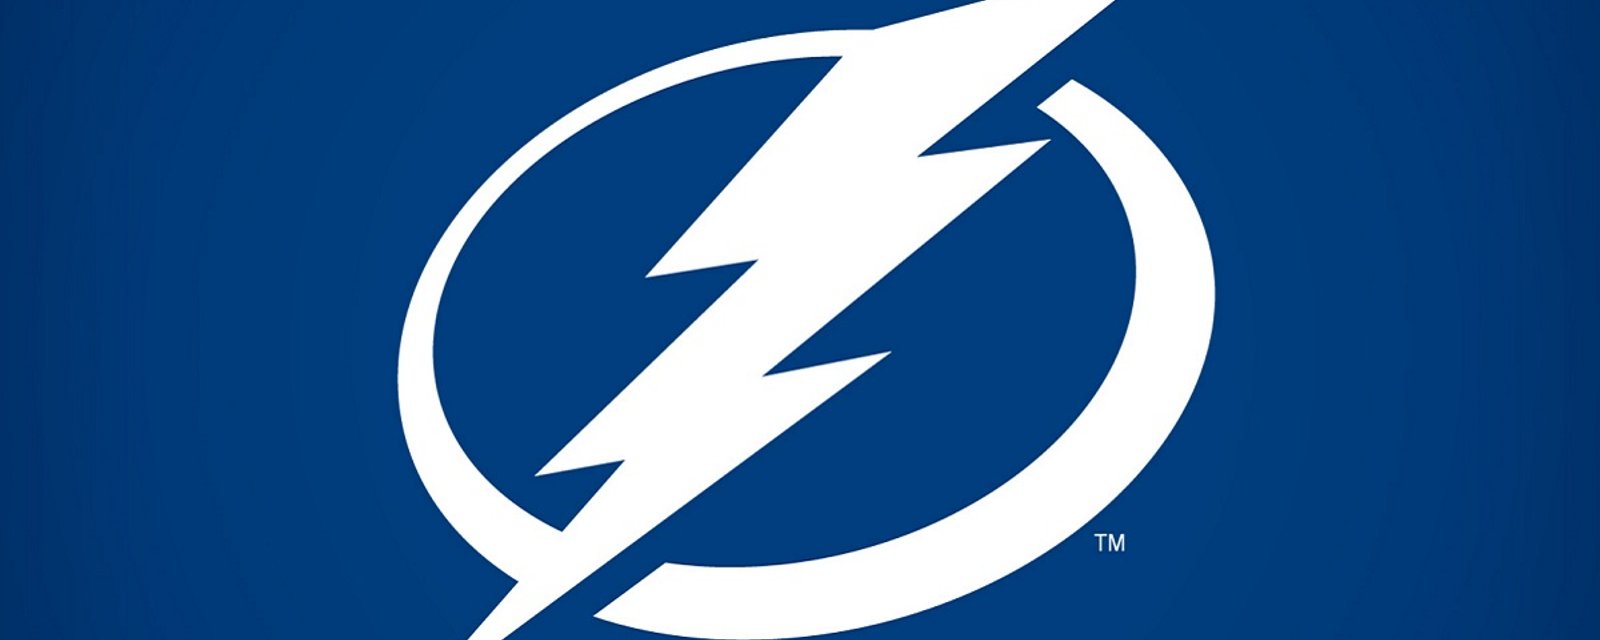 The Tampa Bay Lightning openly mock an NFL team.